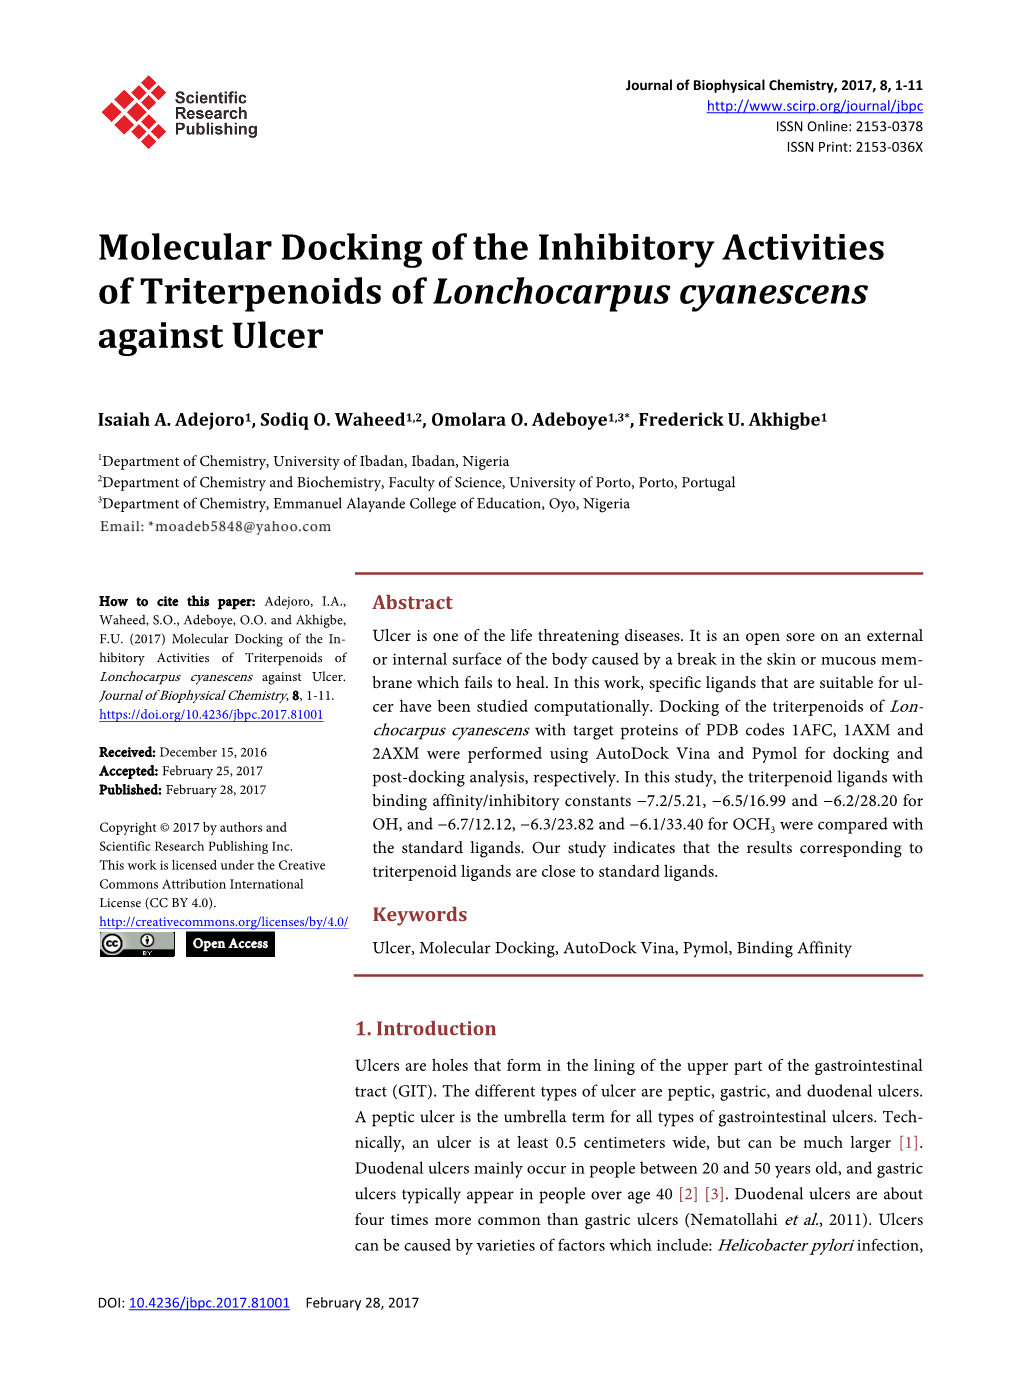 Molecular Docking of the Inhibitory Activities of Triterpenoids of Lonchocarpus Cyanescens Against Ulcer